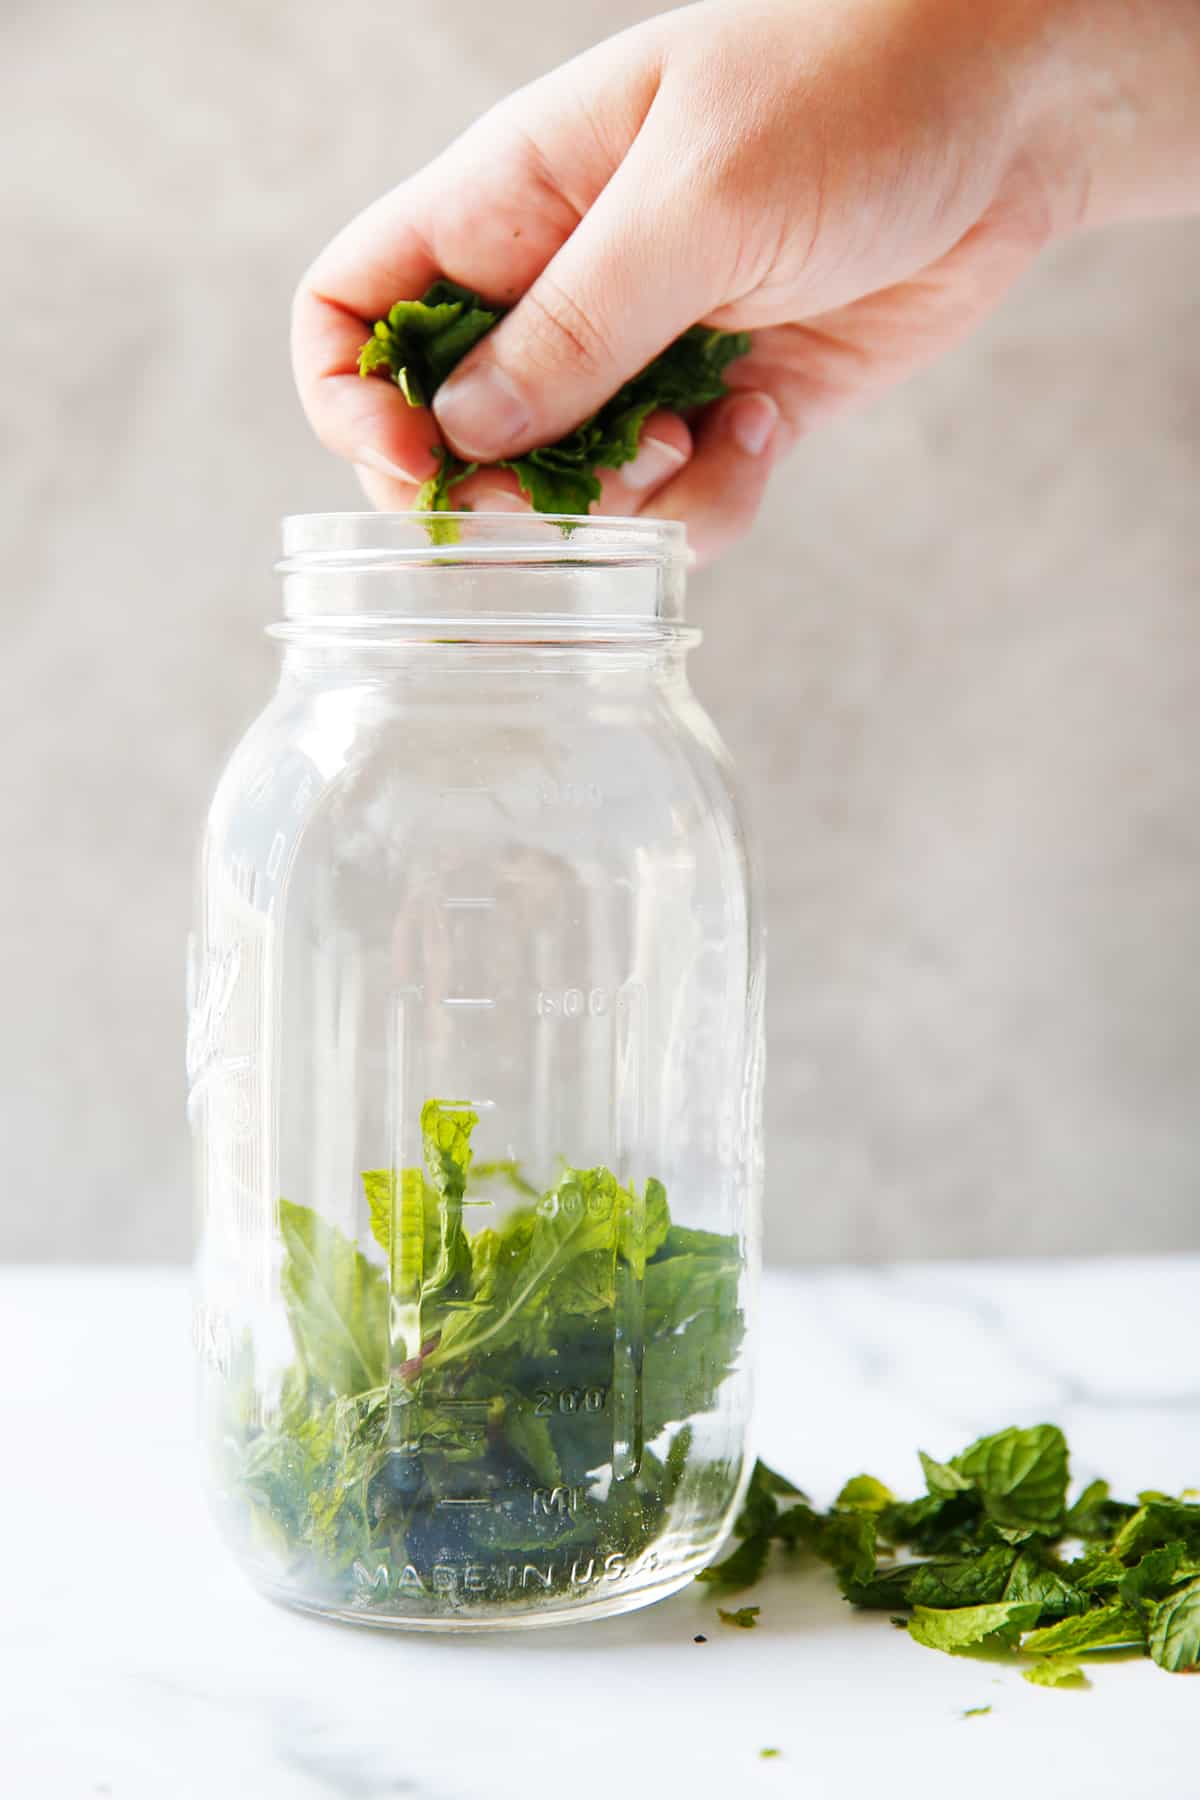 Mint simple syrup recipe being made